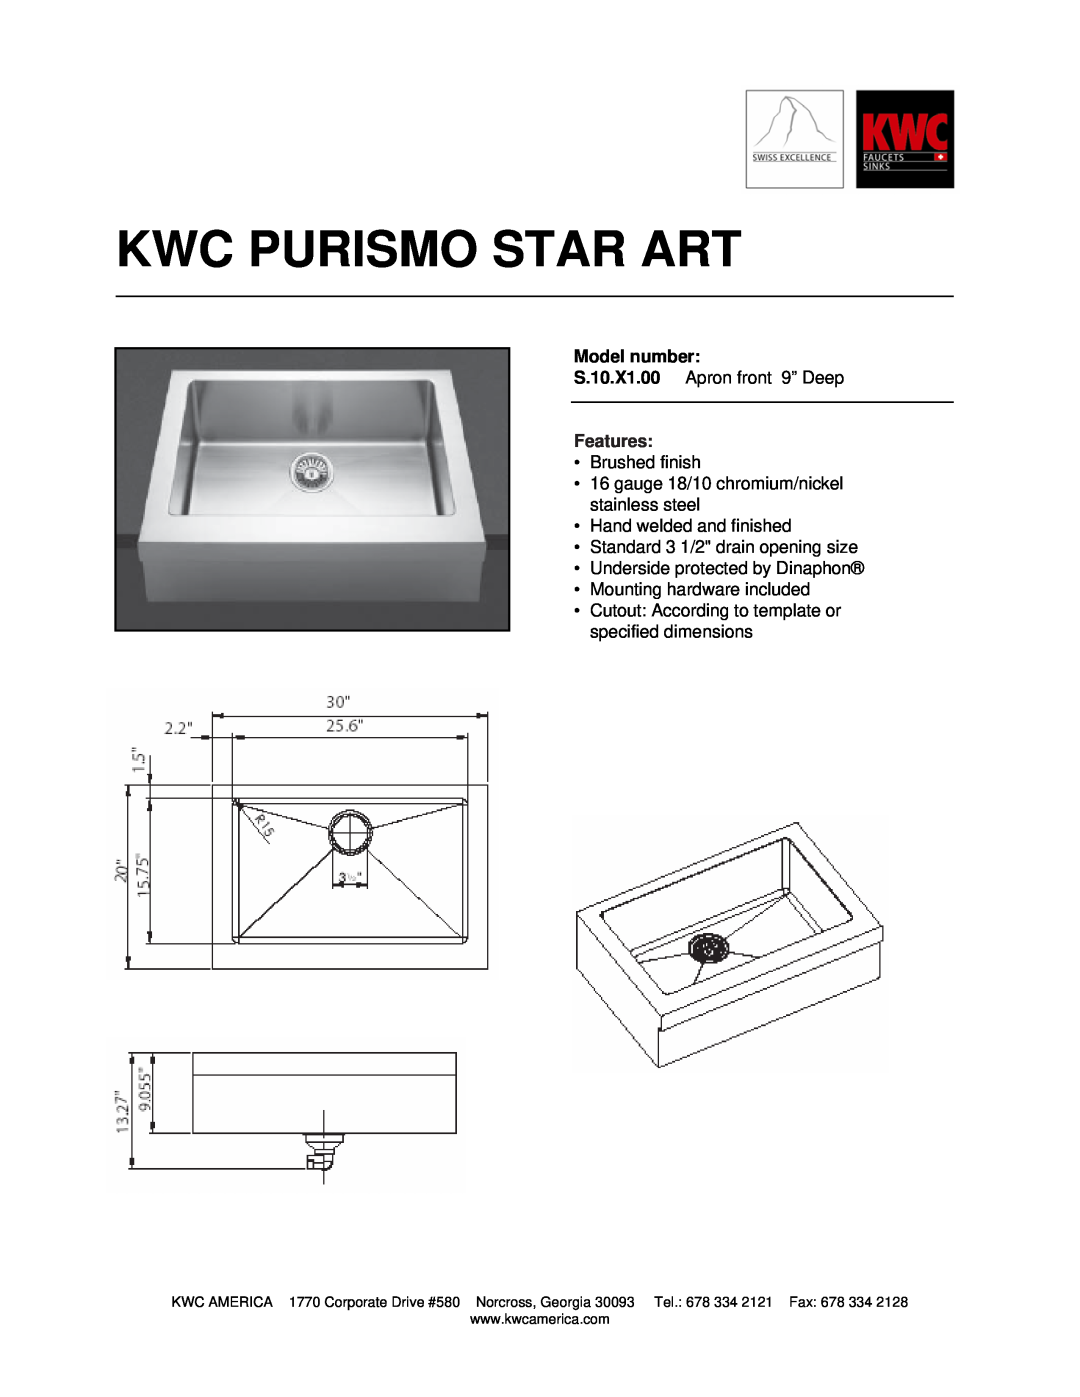 KWC S.10.X1.00 dimensions Kwc Purismo Star Art, Model number, Features 